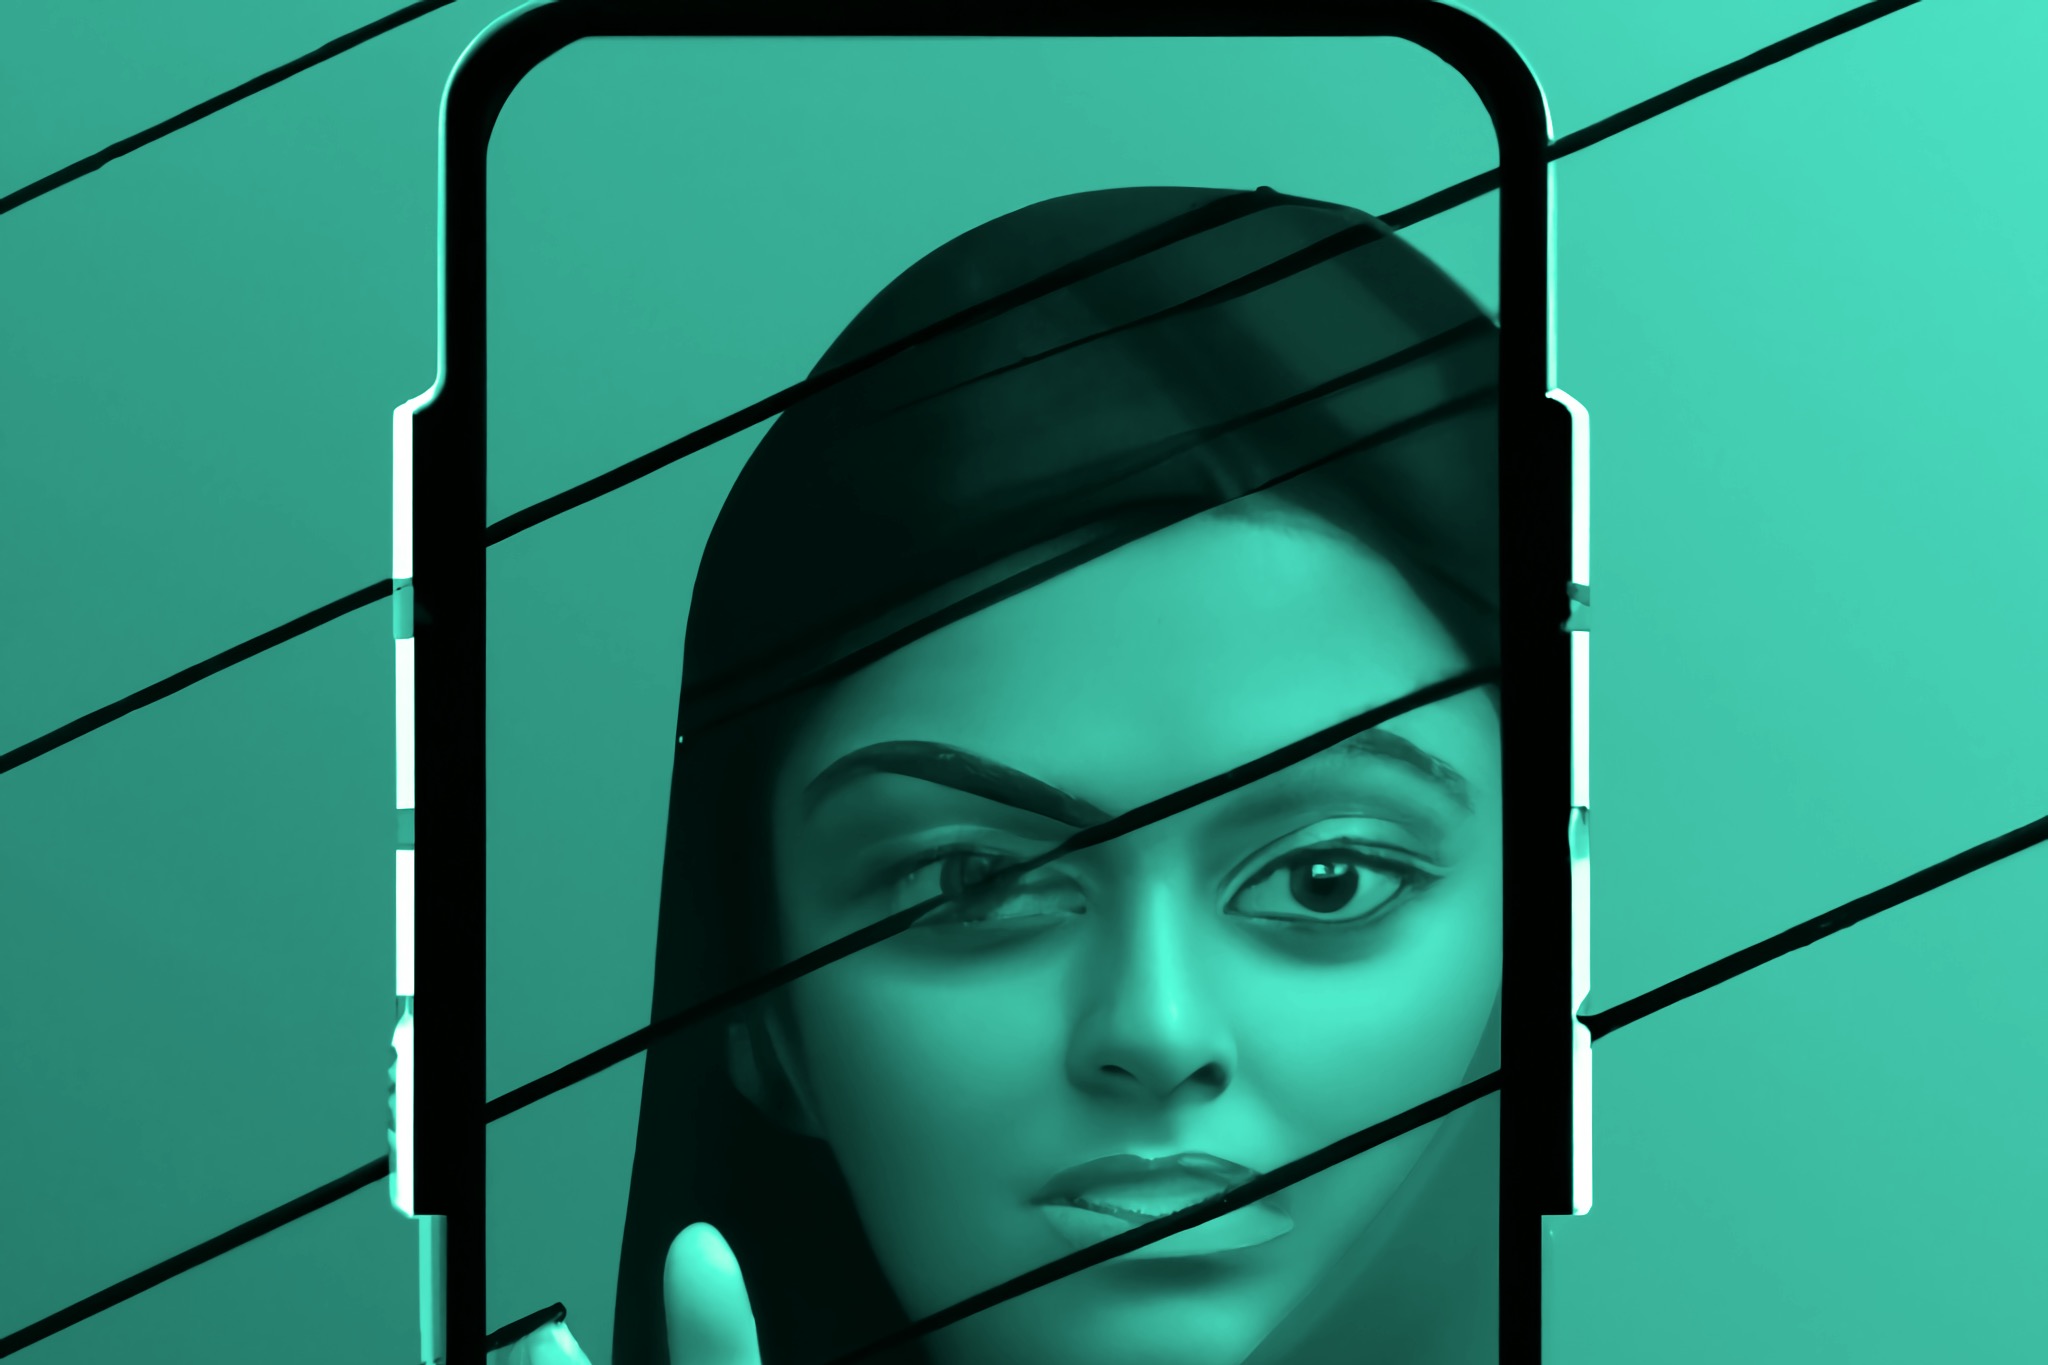 Illustration of a woman looking through a phone